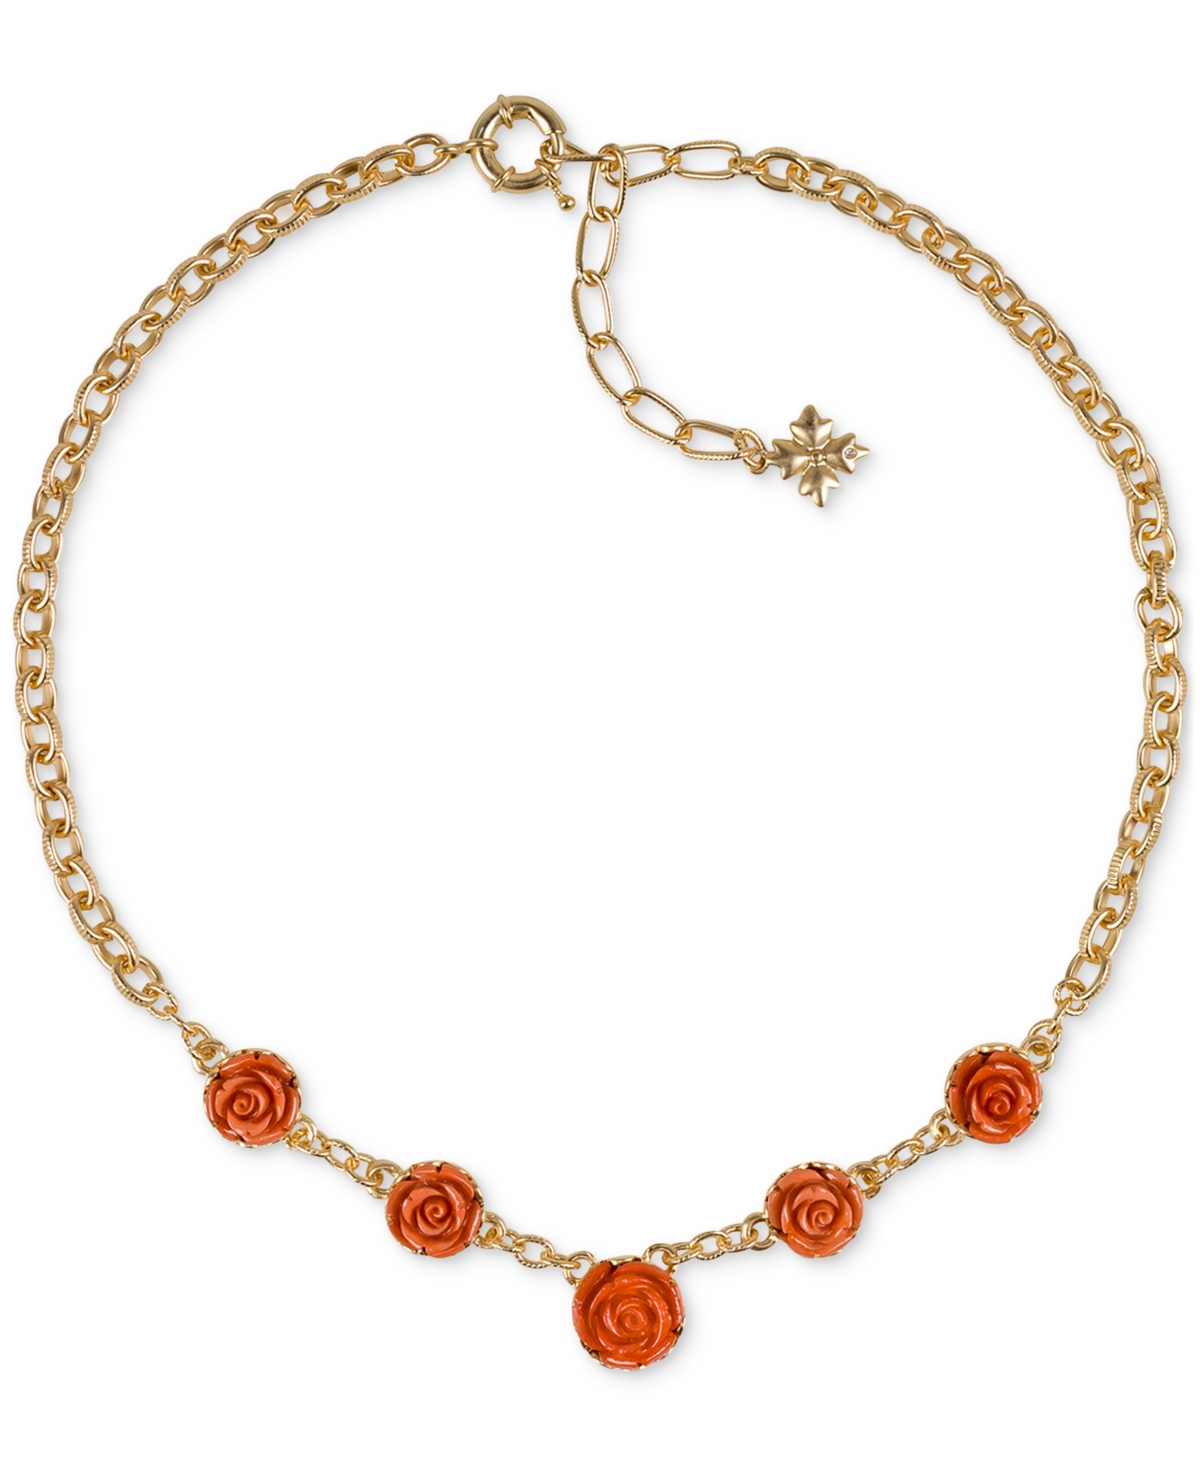 Patricia Nash Gold-tone Carved Rose Statement Necklace, 17" + 3" Extender In Egyptian Gold,pink